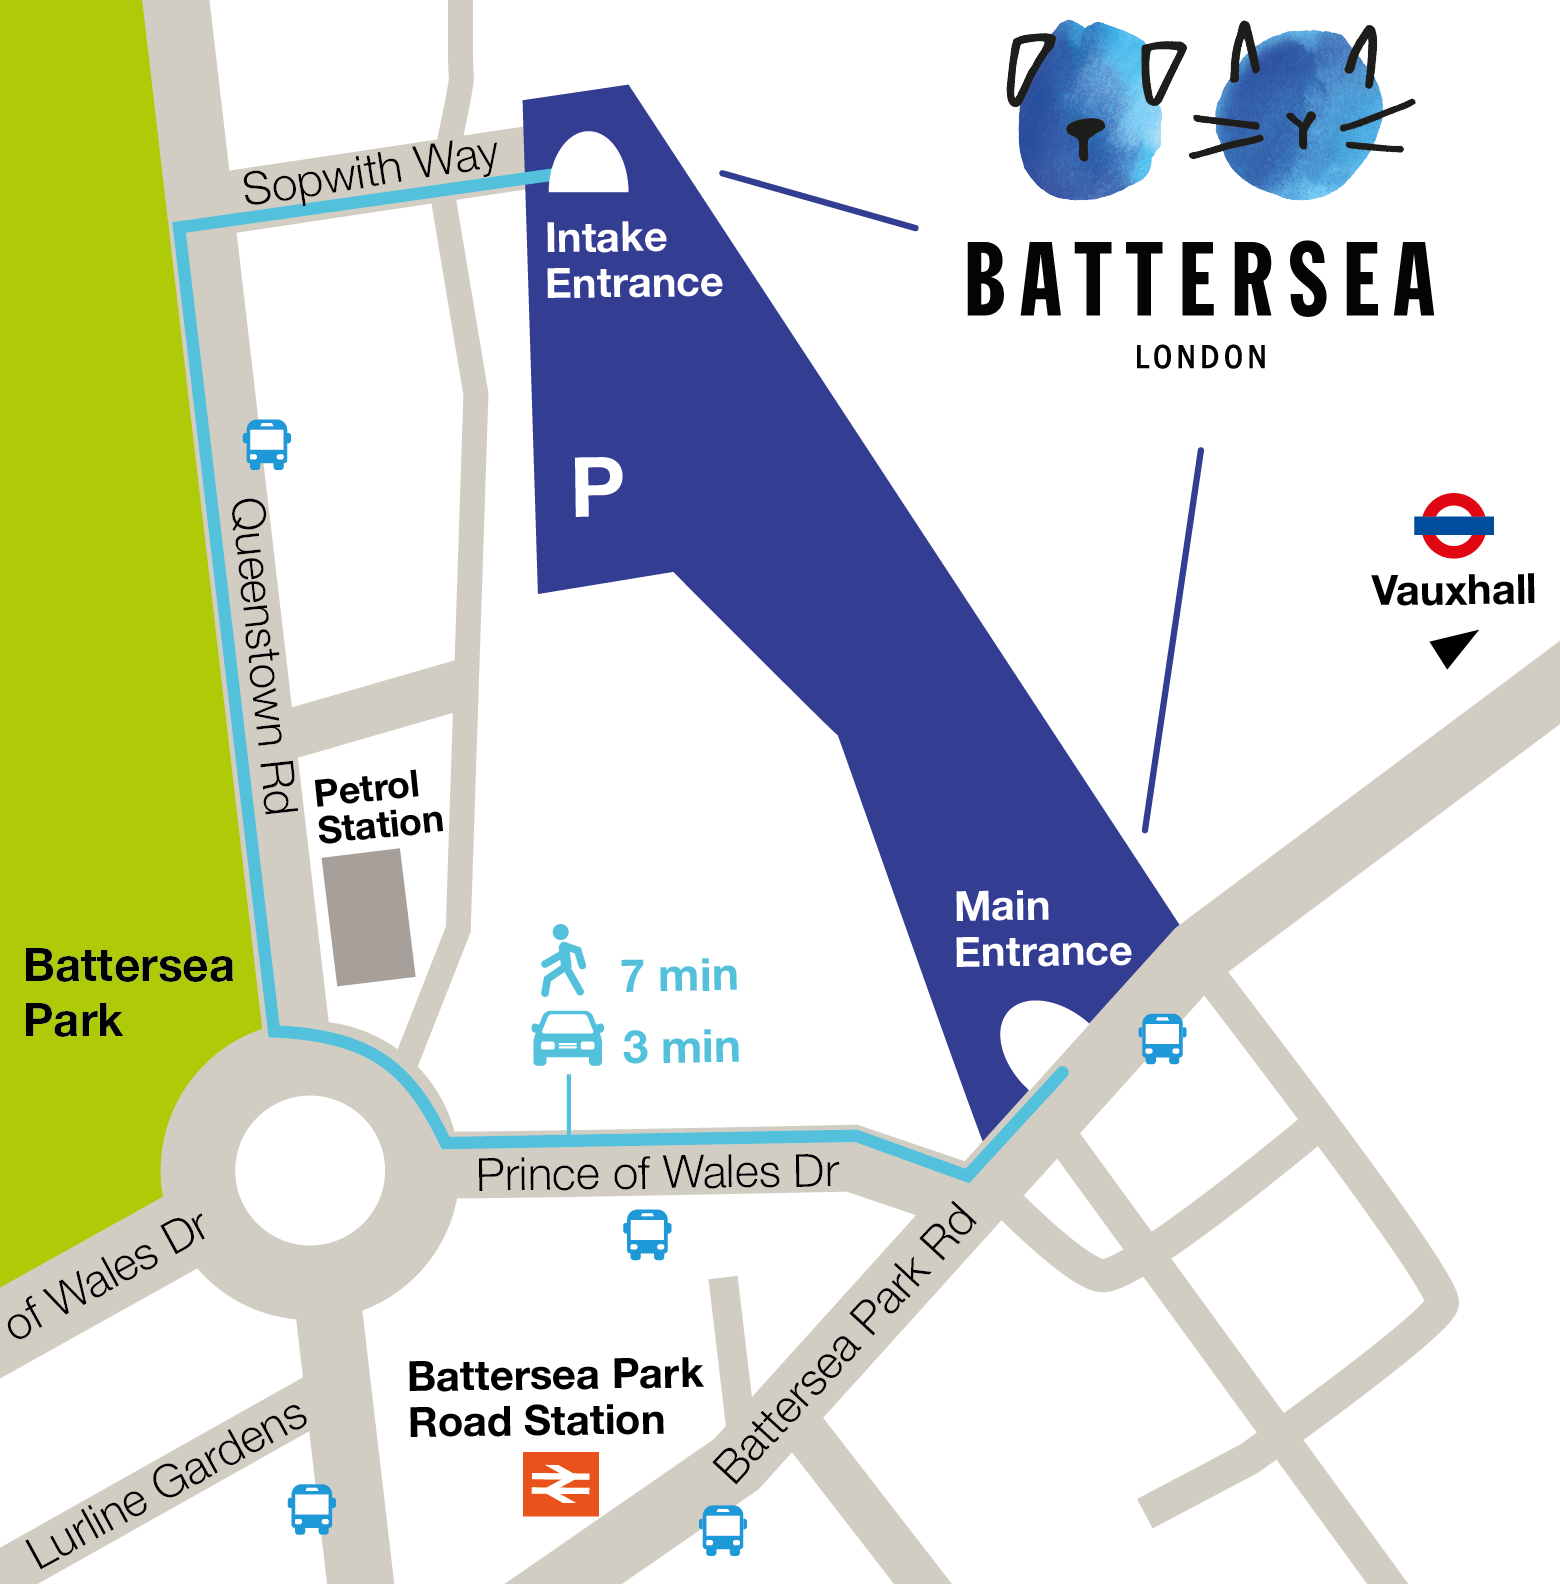 The main entrance to the site is on 4 Battersea Park Road across from the bus stop